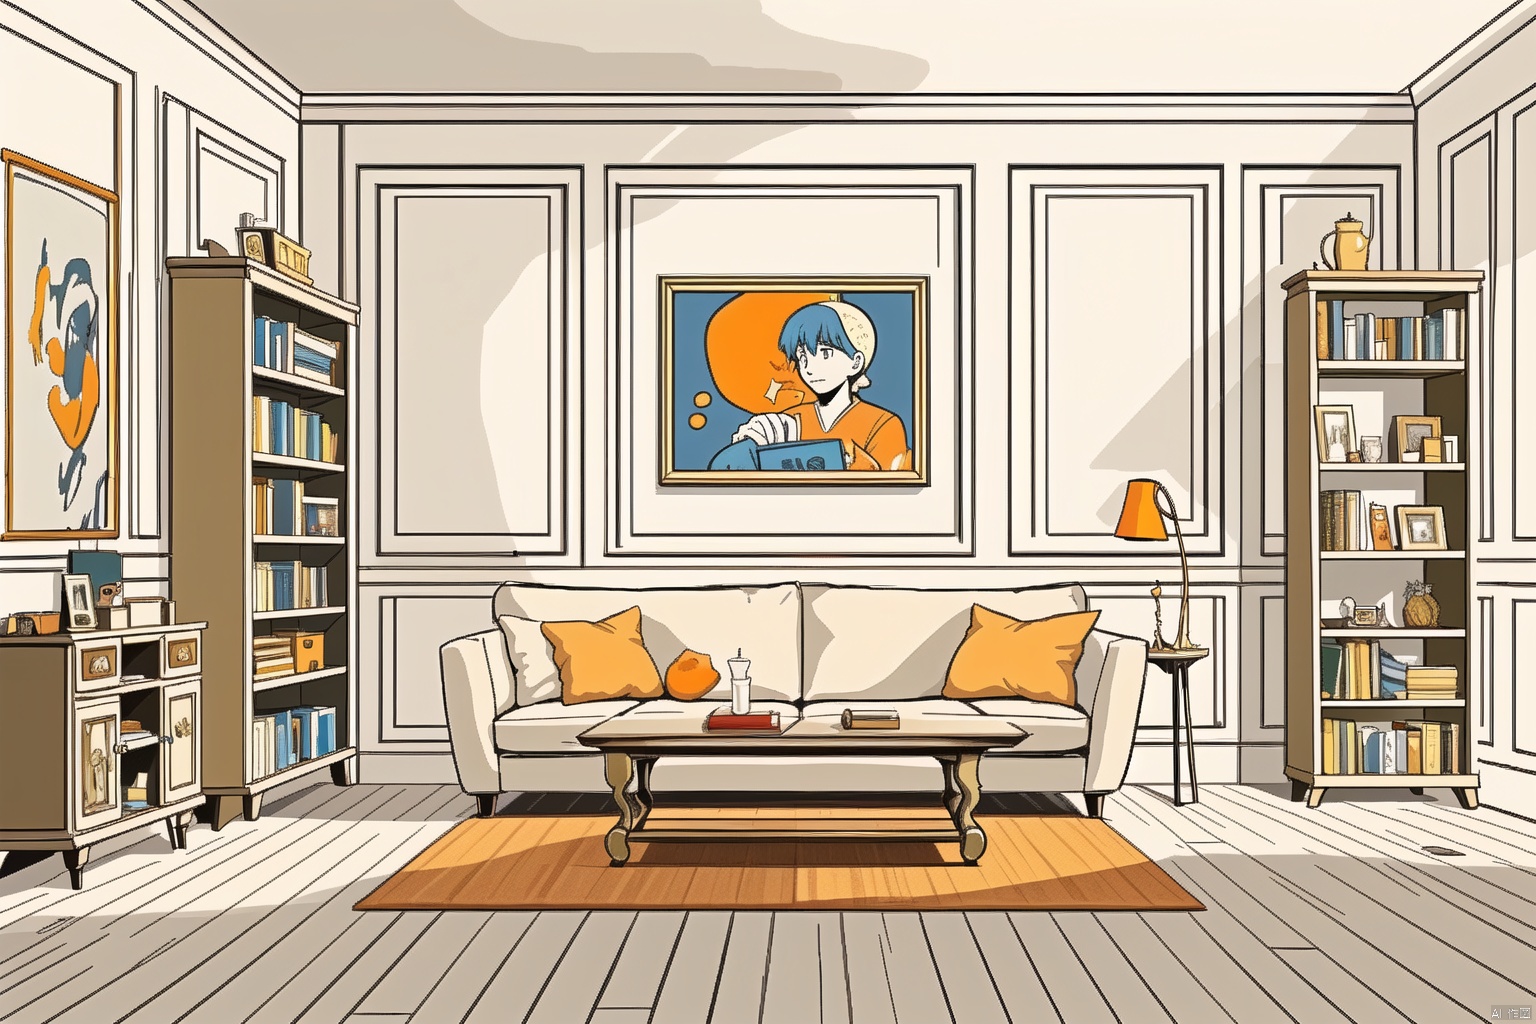  indoor scene, room, 24k, detailed depiction, comic style, fresh and healing color matching, smooth lines, high quality, healing style, warm and cozy, , cozy animation scenes,living room,Without humans,Cream colored wall,Orange sofa,Bookcase